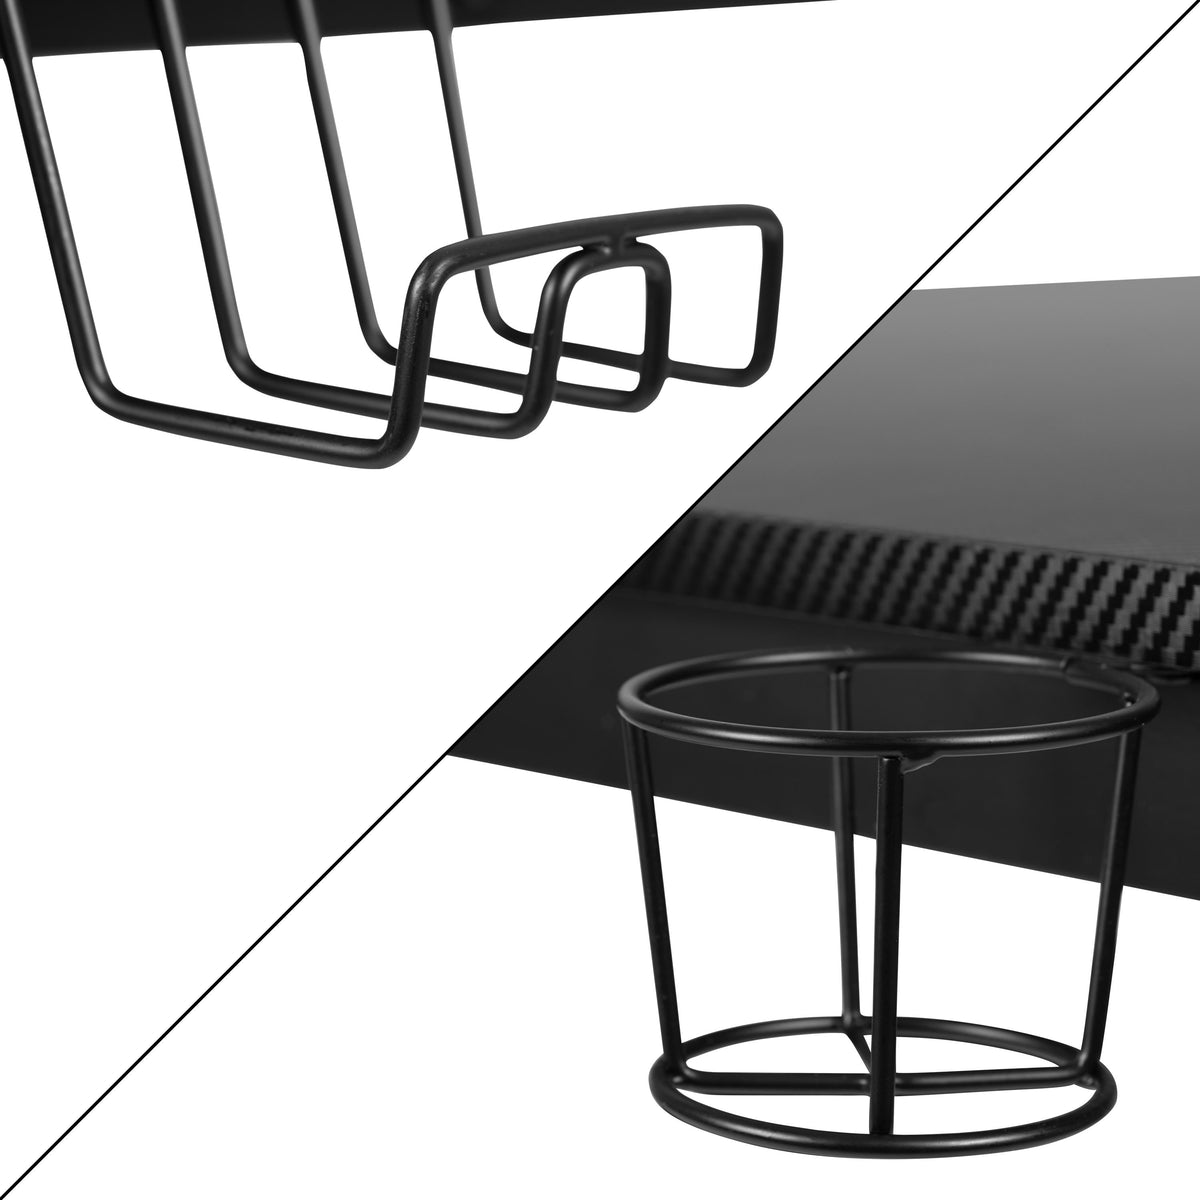 Gray |#| Black/Gray Gaming Desk Bundle - Cup/Headphone Holders, Wire Management